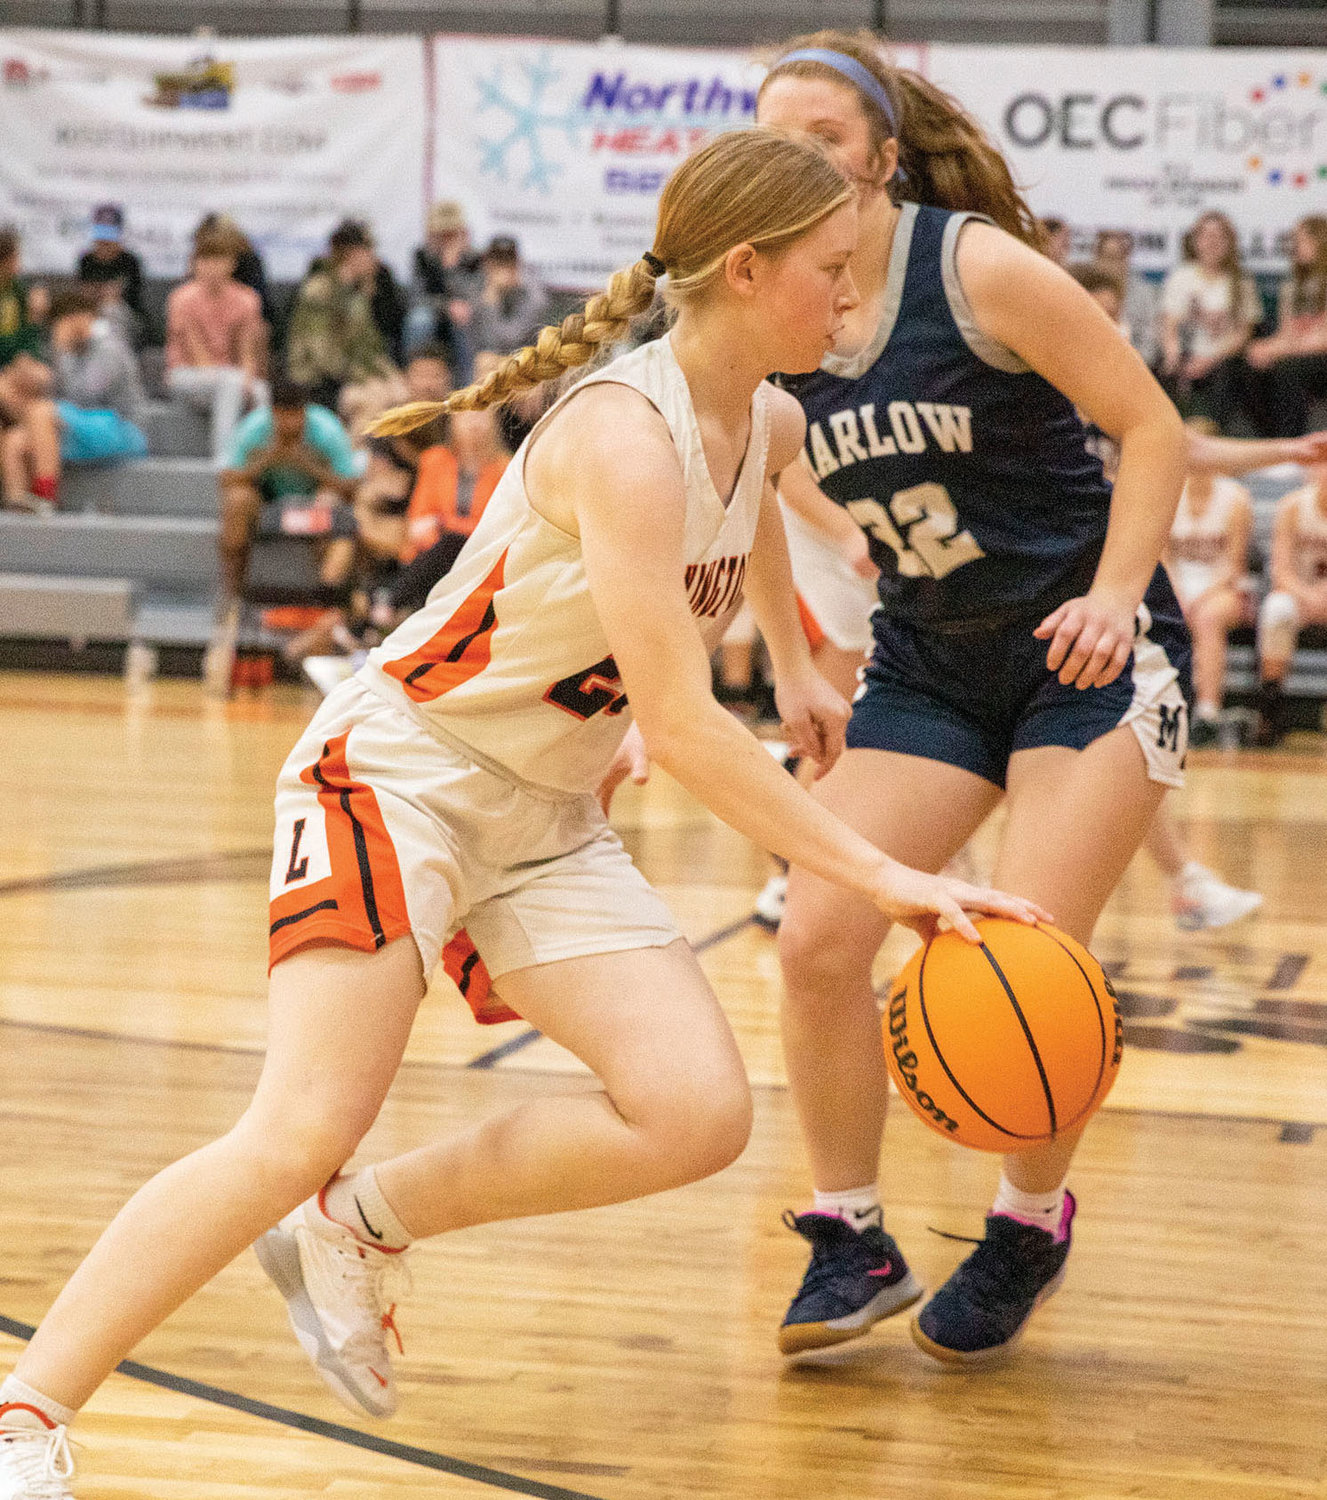 Lexington sophomore Abby Sample drives the ball against Marlow during their District matchup. The Bulldogs were defeated 52-32. Sample scored five points.